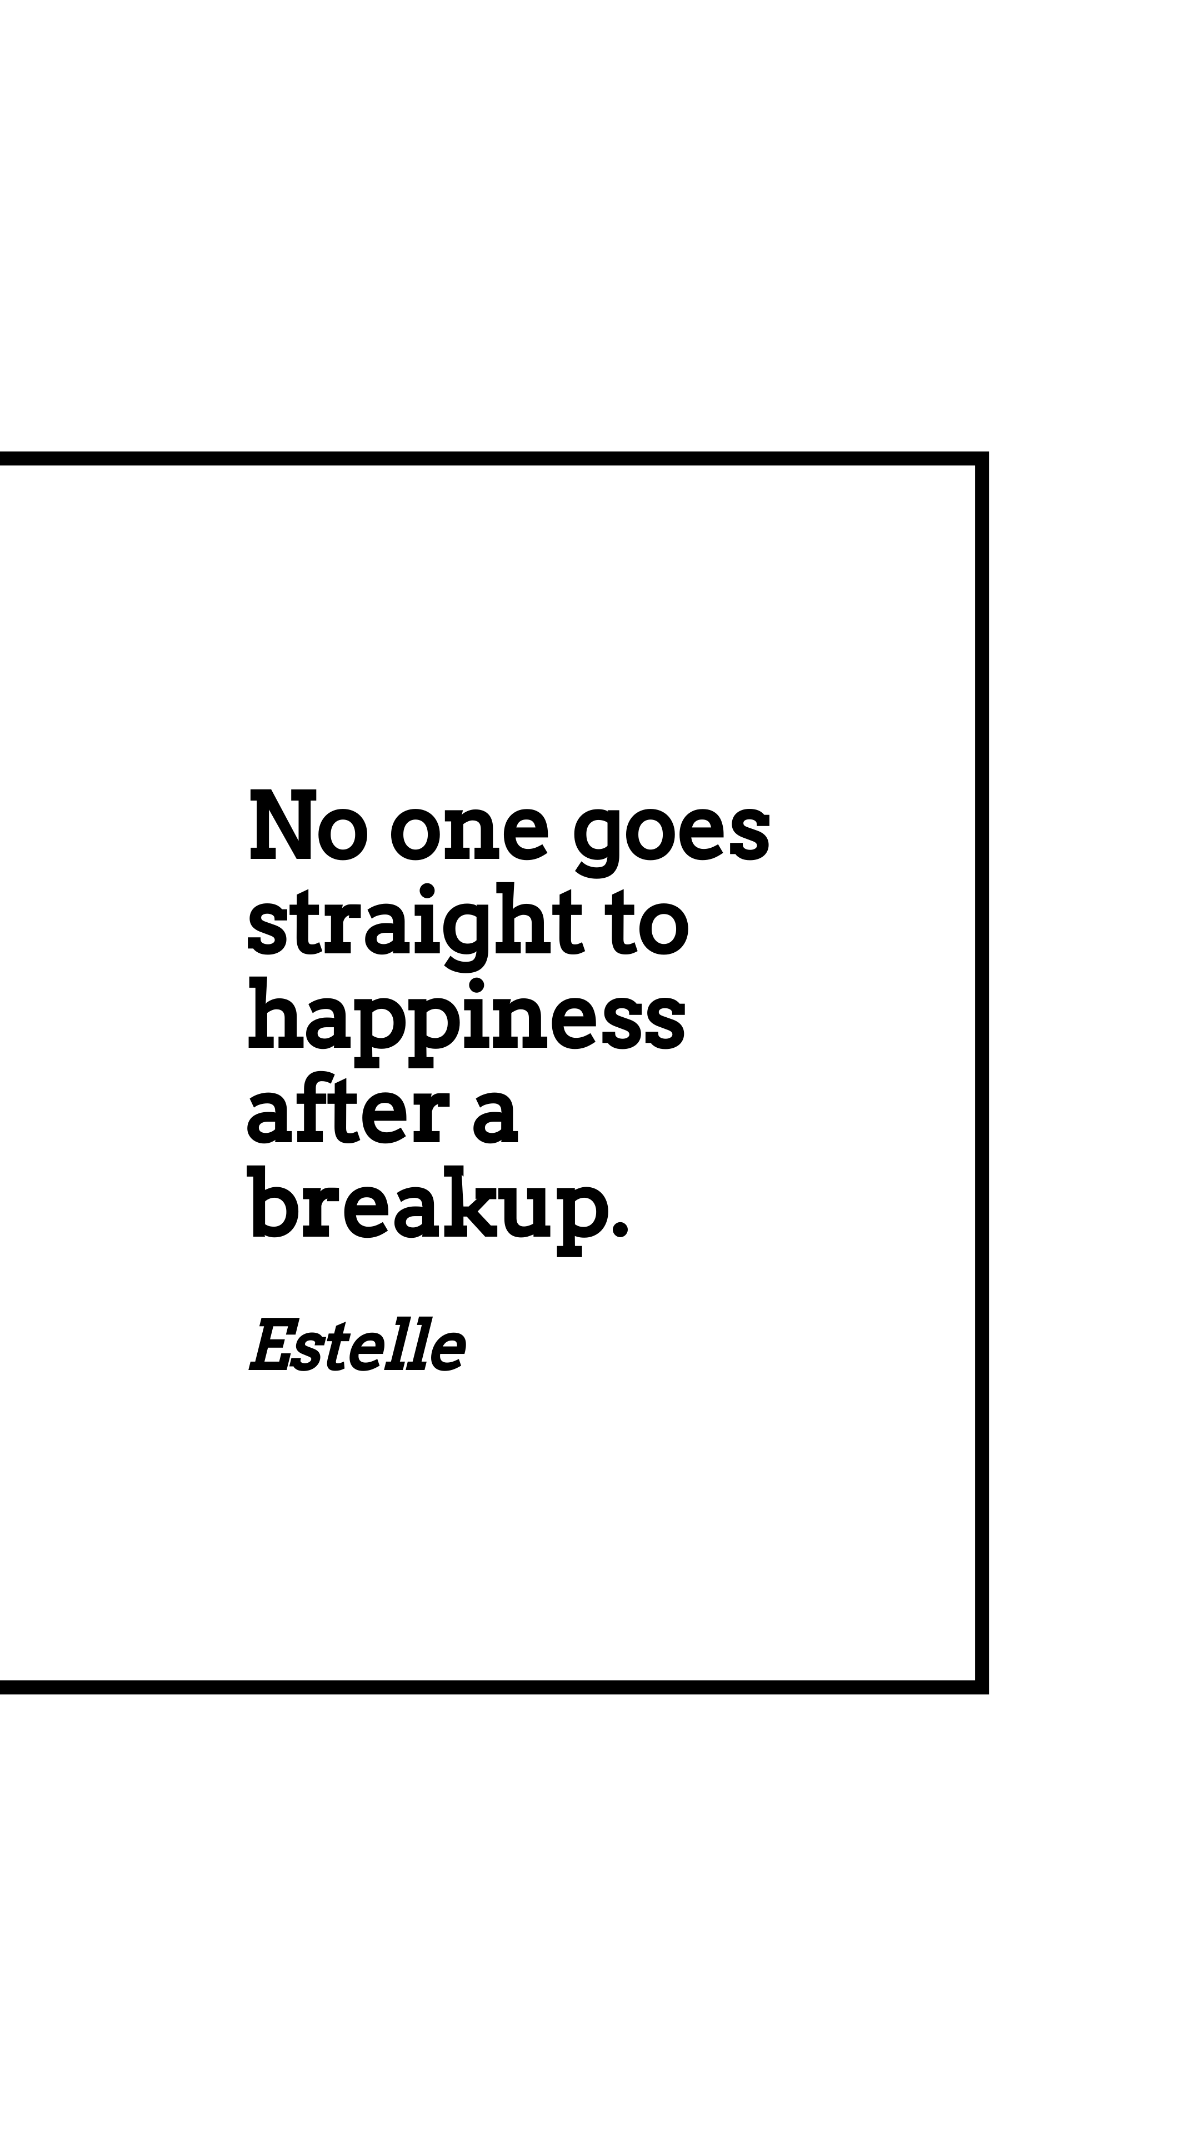 Estelle - No one goes straight to happiness after a breakup.